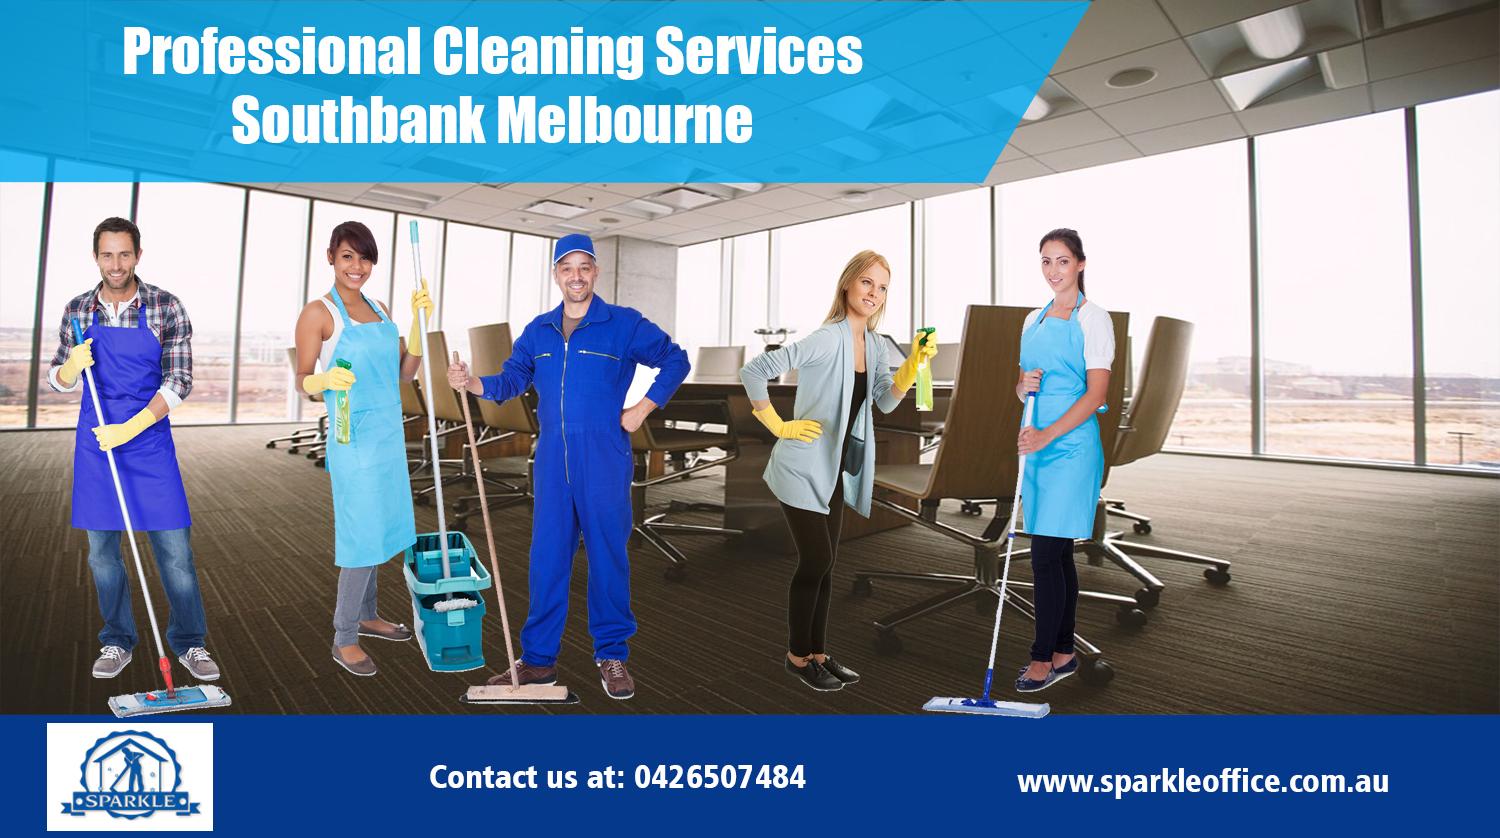 Professional Cleaning Services Southbank Melbourne